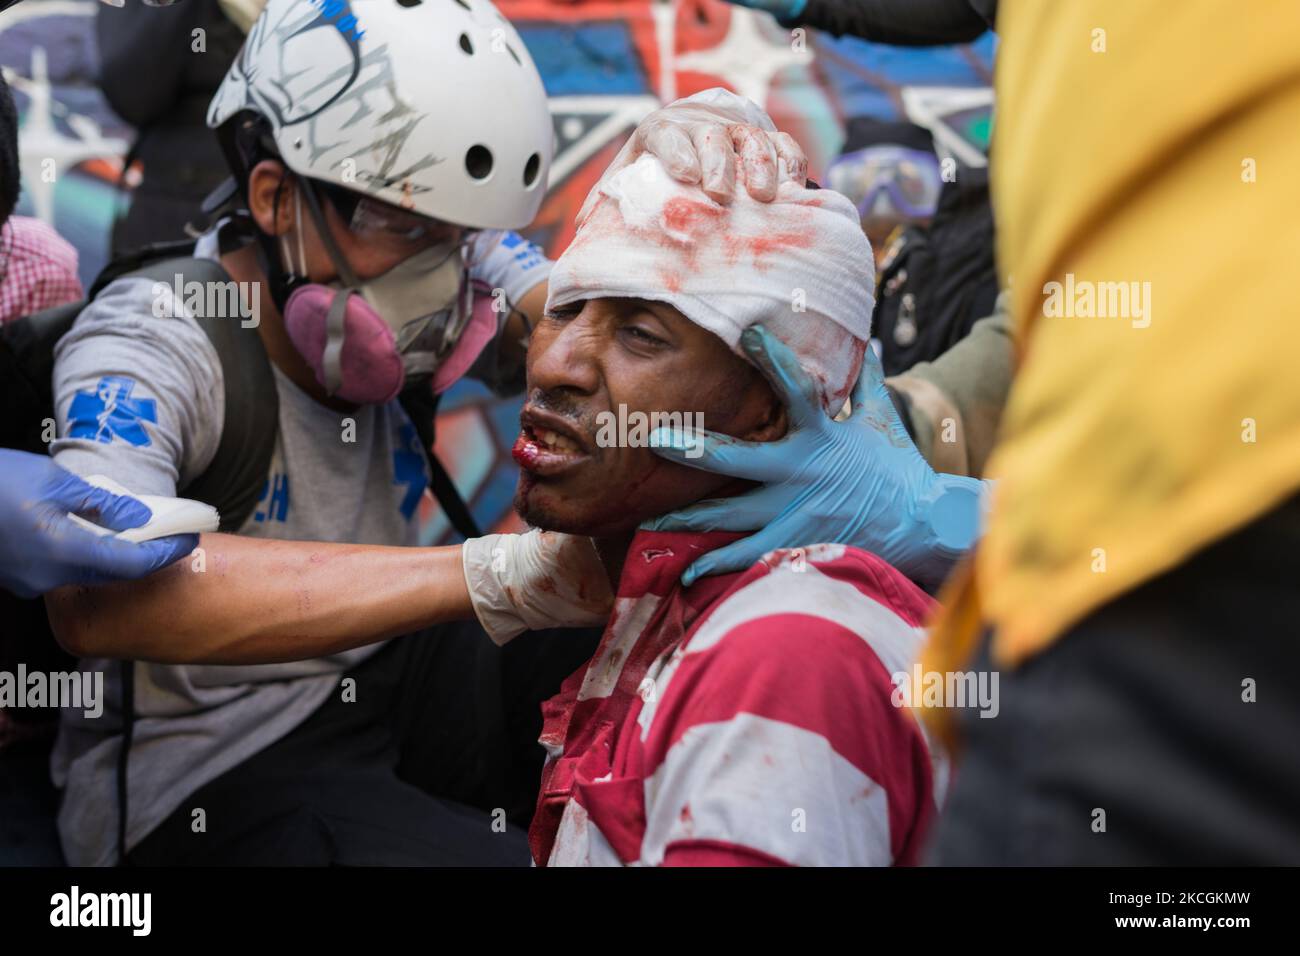 (EDITOR'S NOTE: Image depicts graphic content) A man injured during clashes with riot police is assisted by paramedics during a protest against the government in Medellin, Colombia, on June 28, 2021. Some people injured by police shoots with no letal guns. (Photo by Santiago Botero/NurPhoto) Stock Photo